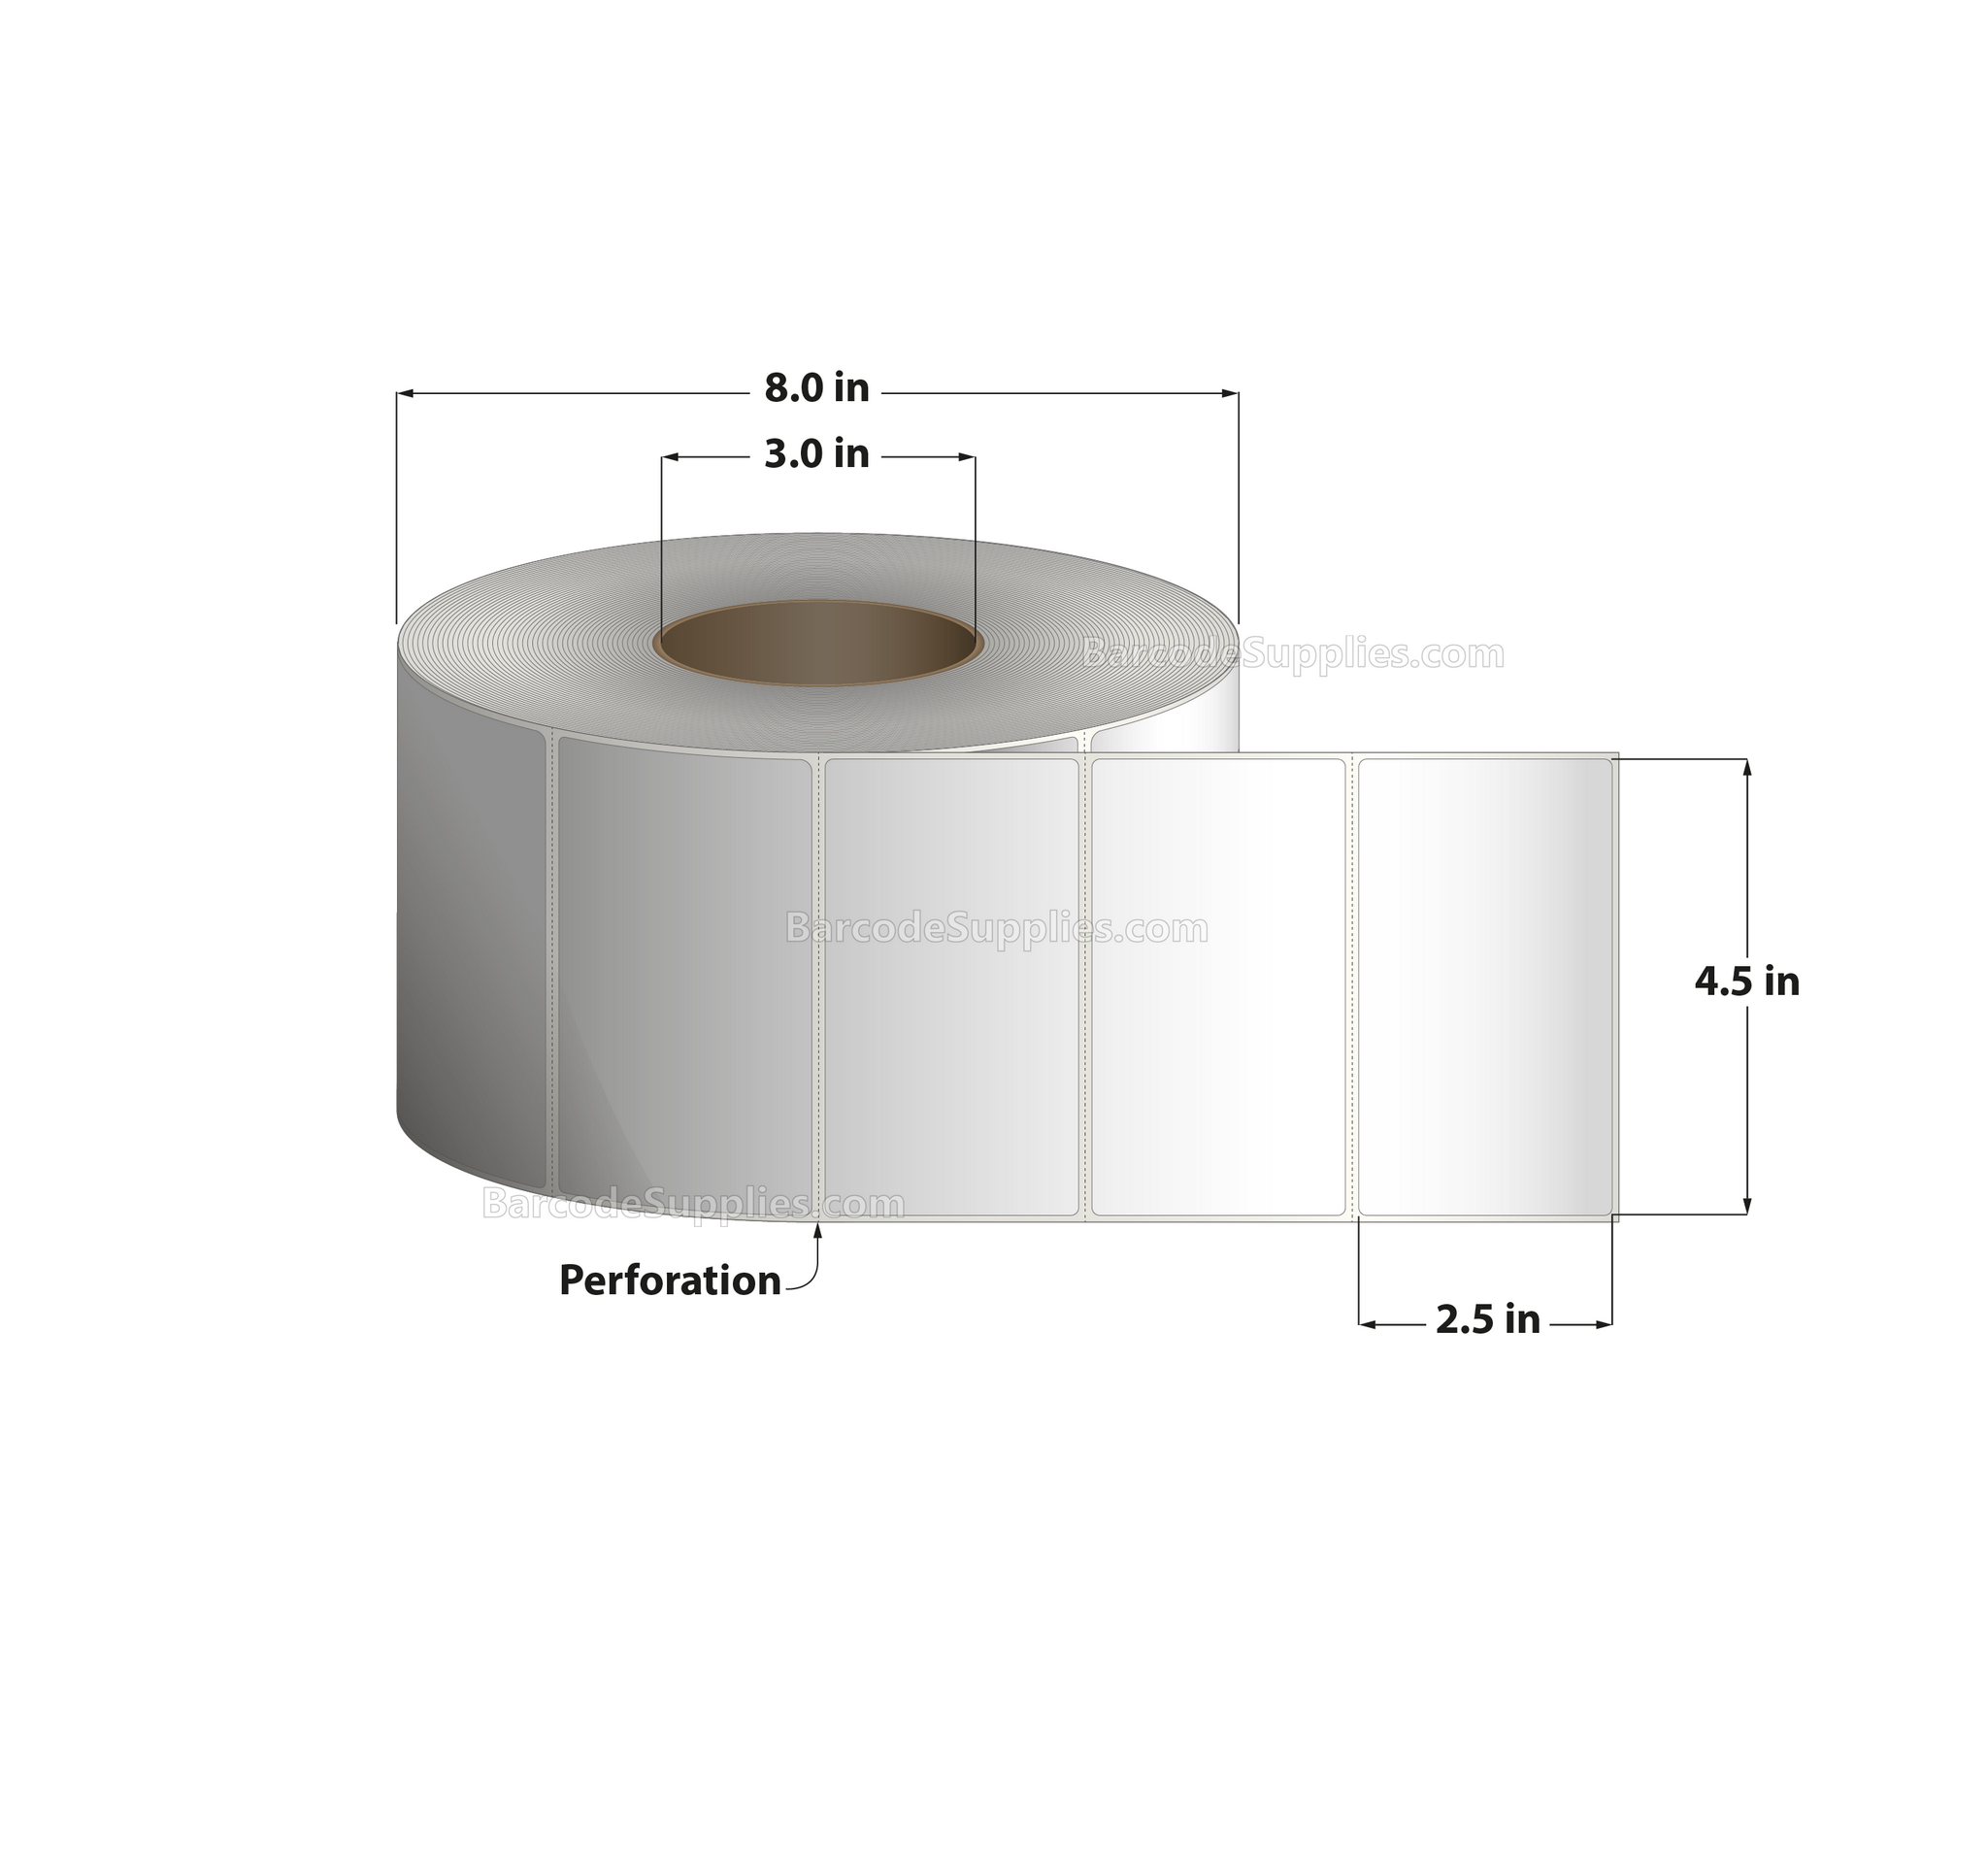 4.5 x 2.5 Thermal Transfer White Labels With Permanent Adhesive - Perforated - 2500 Labels Per Roll - Carton Of 4 Rolls - 10000 Labels Total - MPN: RT-45-25-2500-3